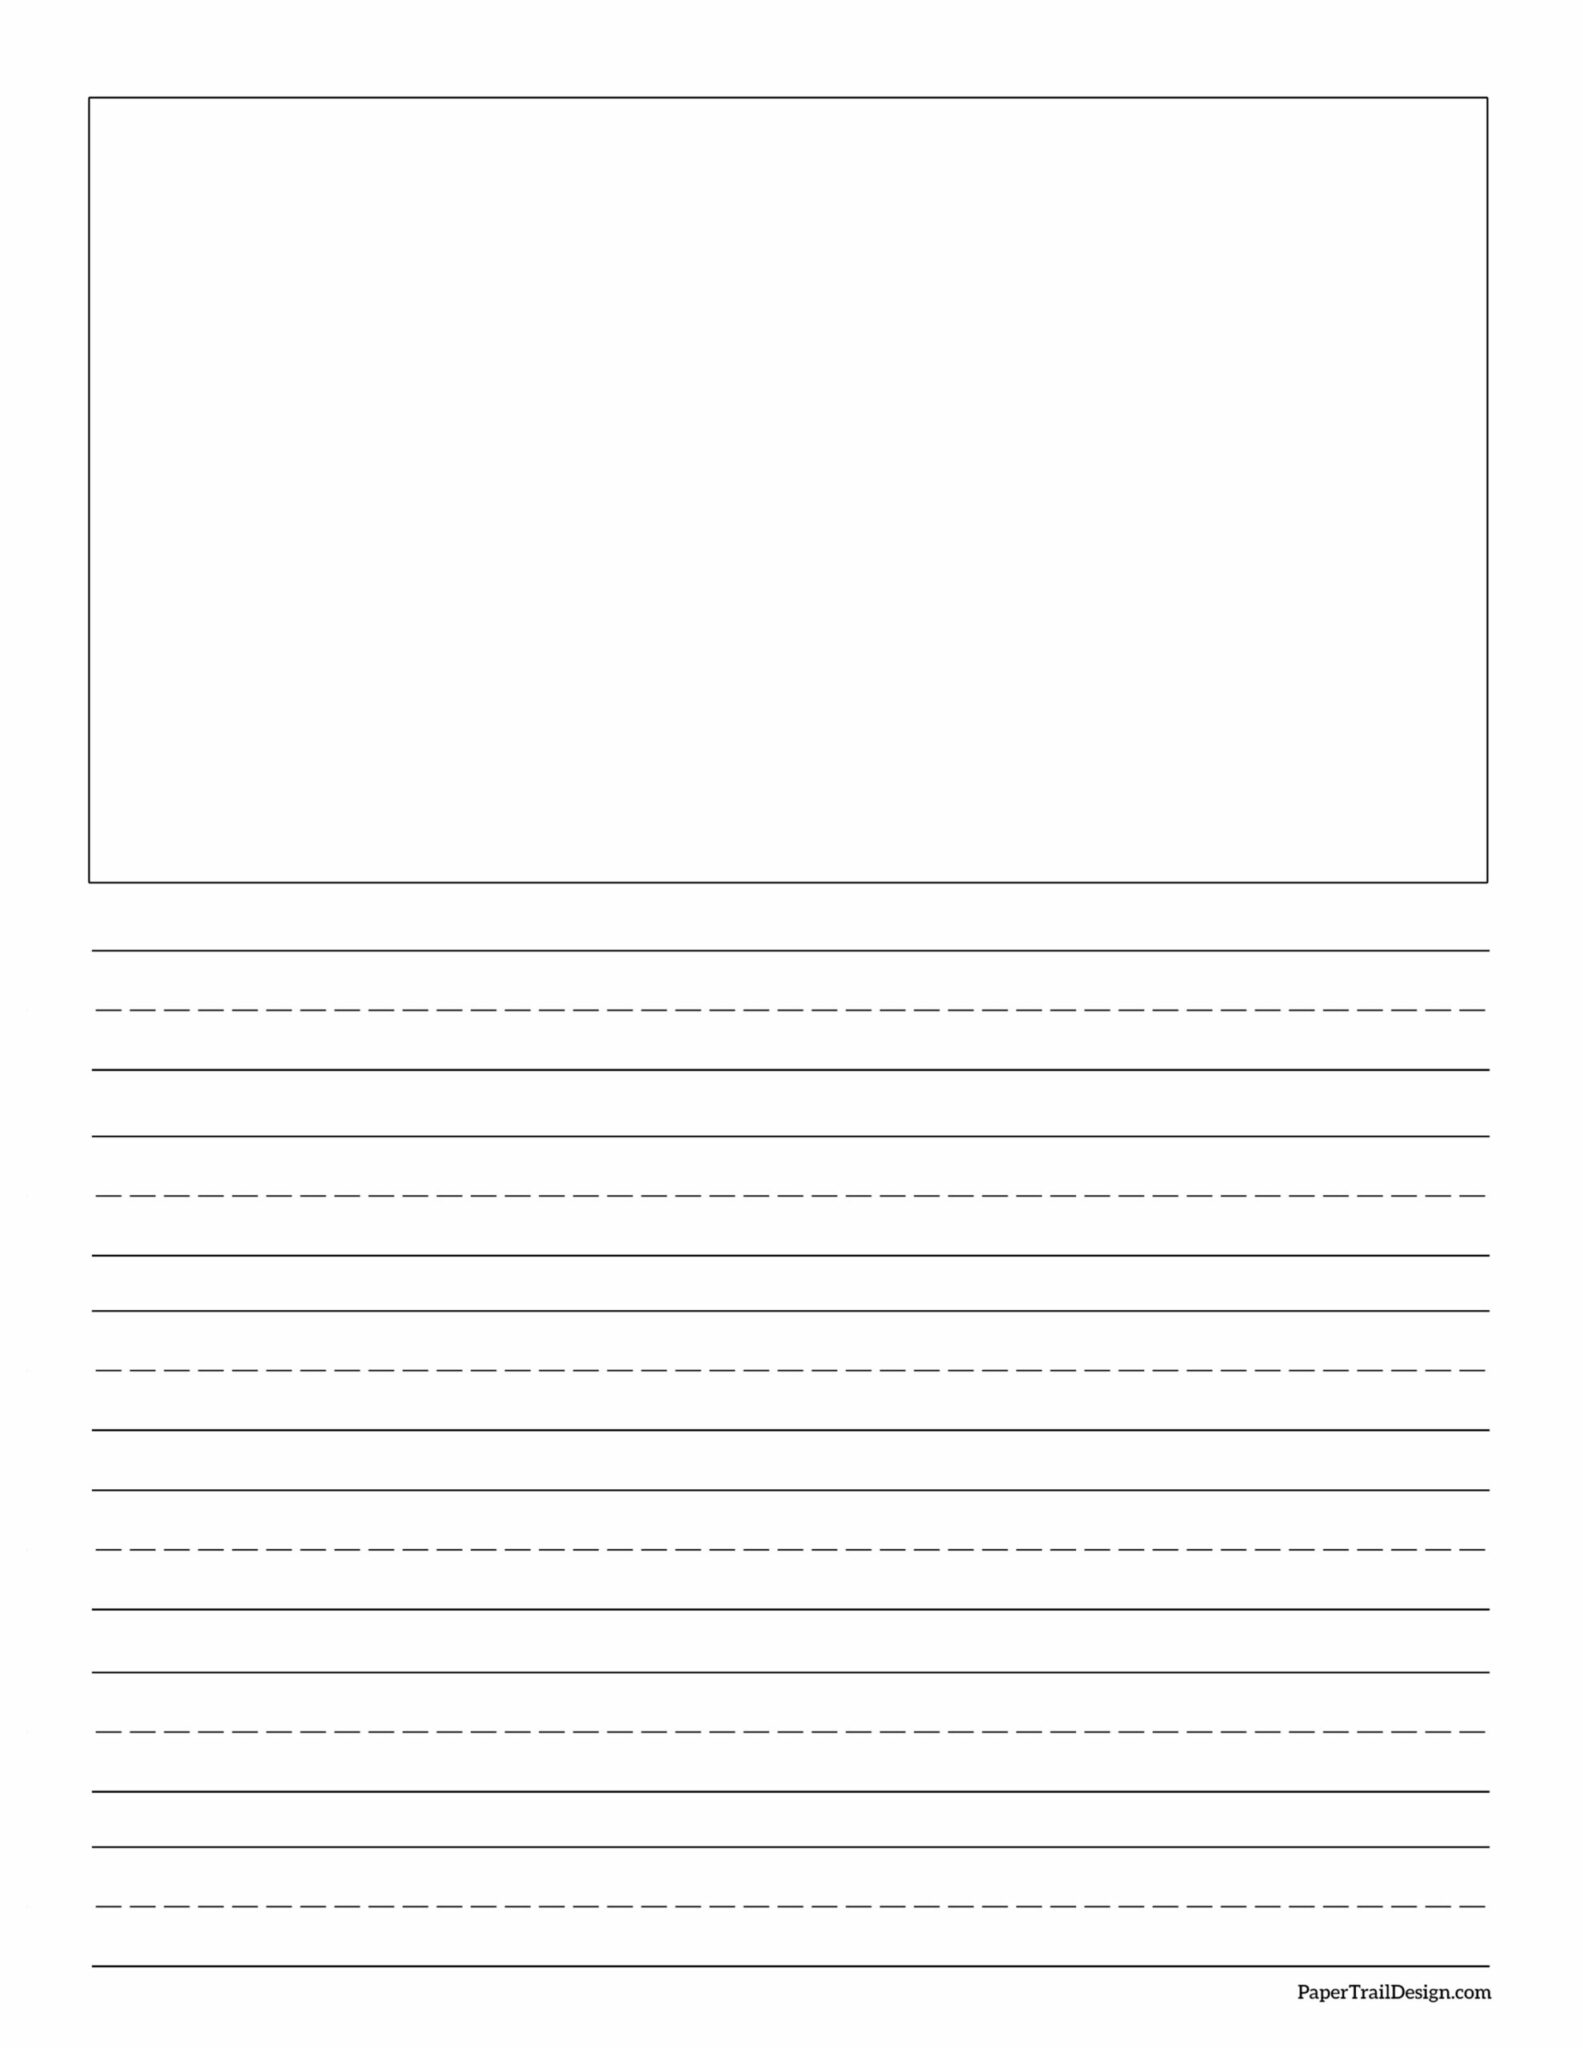 free printable lined writing paper with drawing box